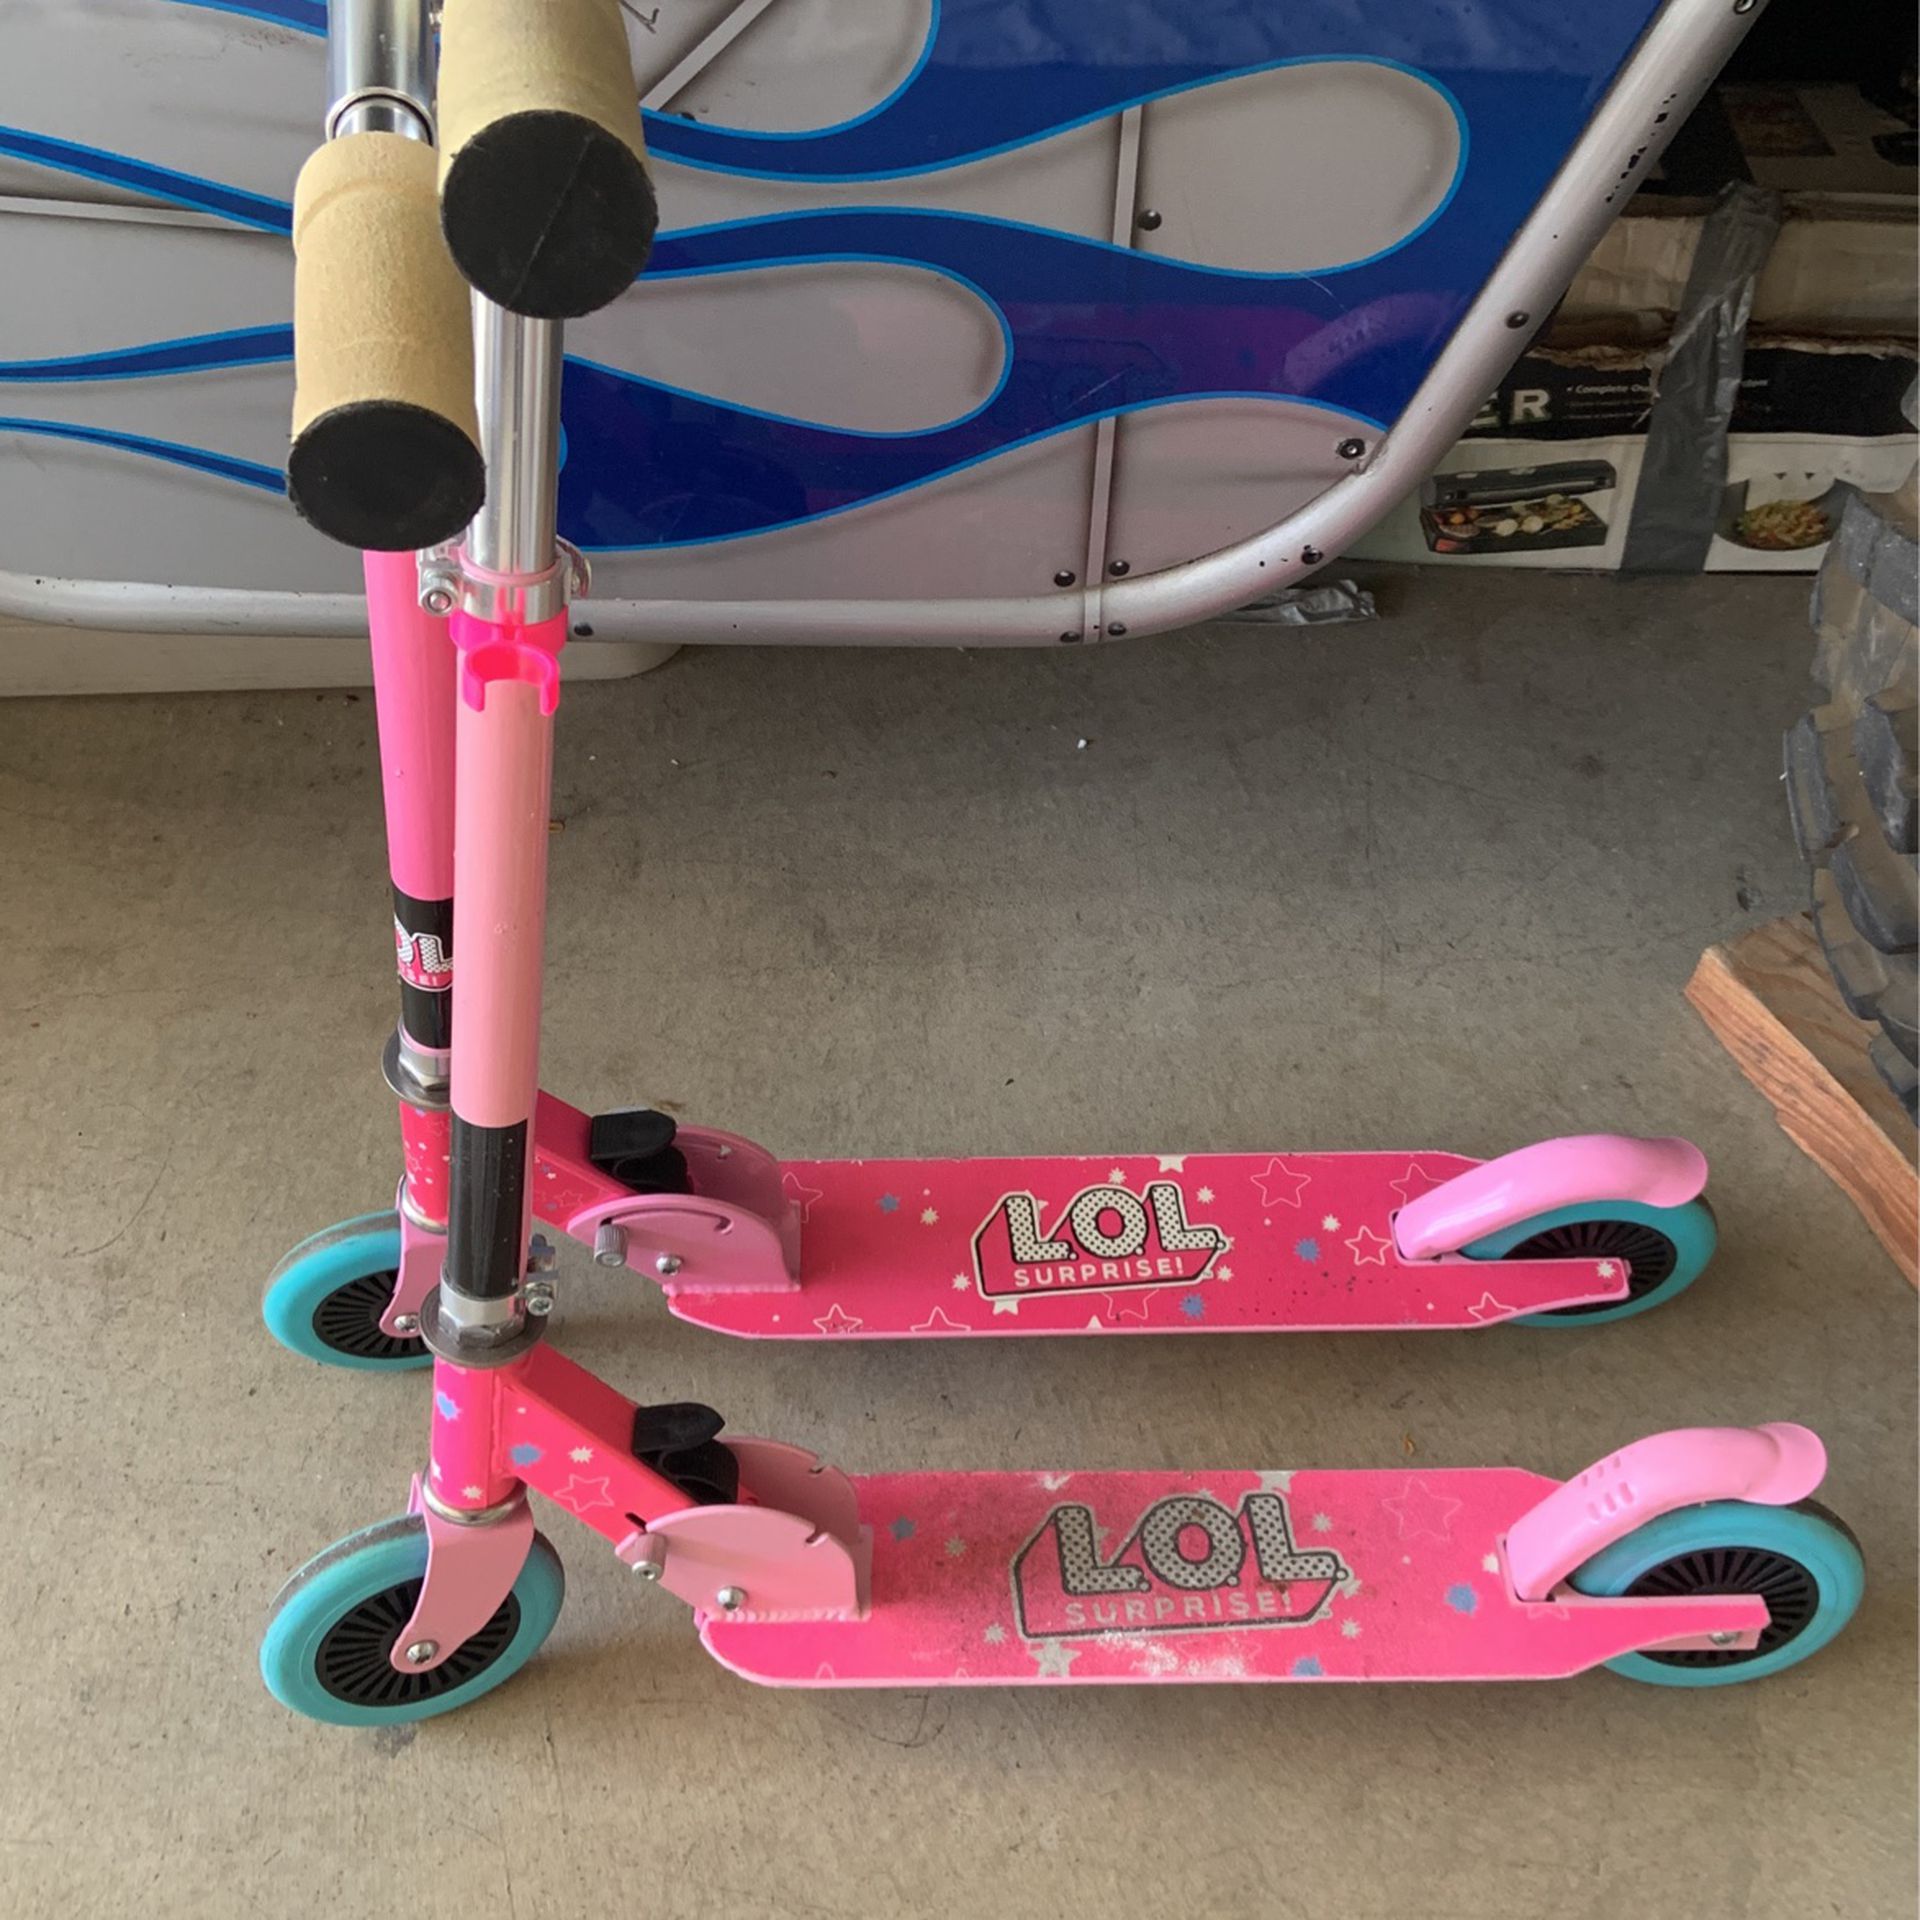 2 Lol Surprise Scooters $5 dollars Each